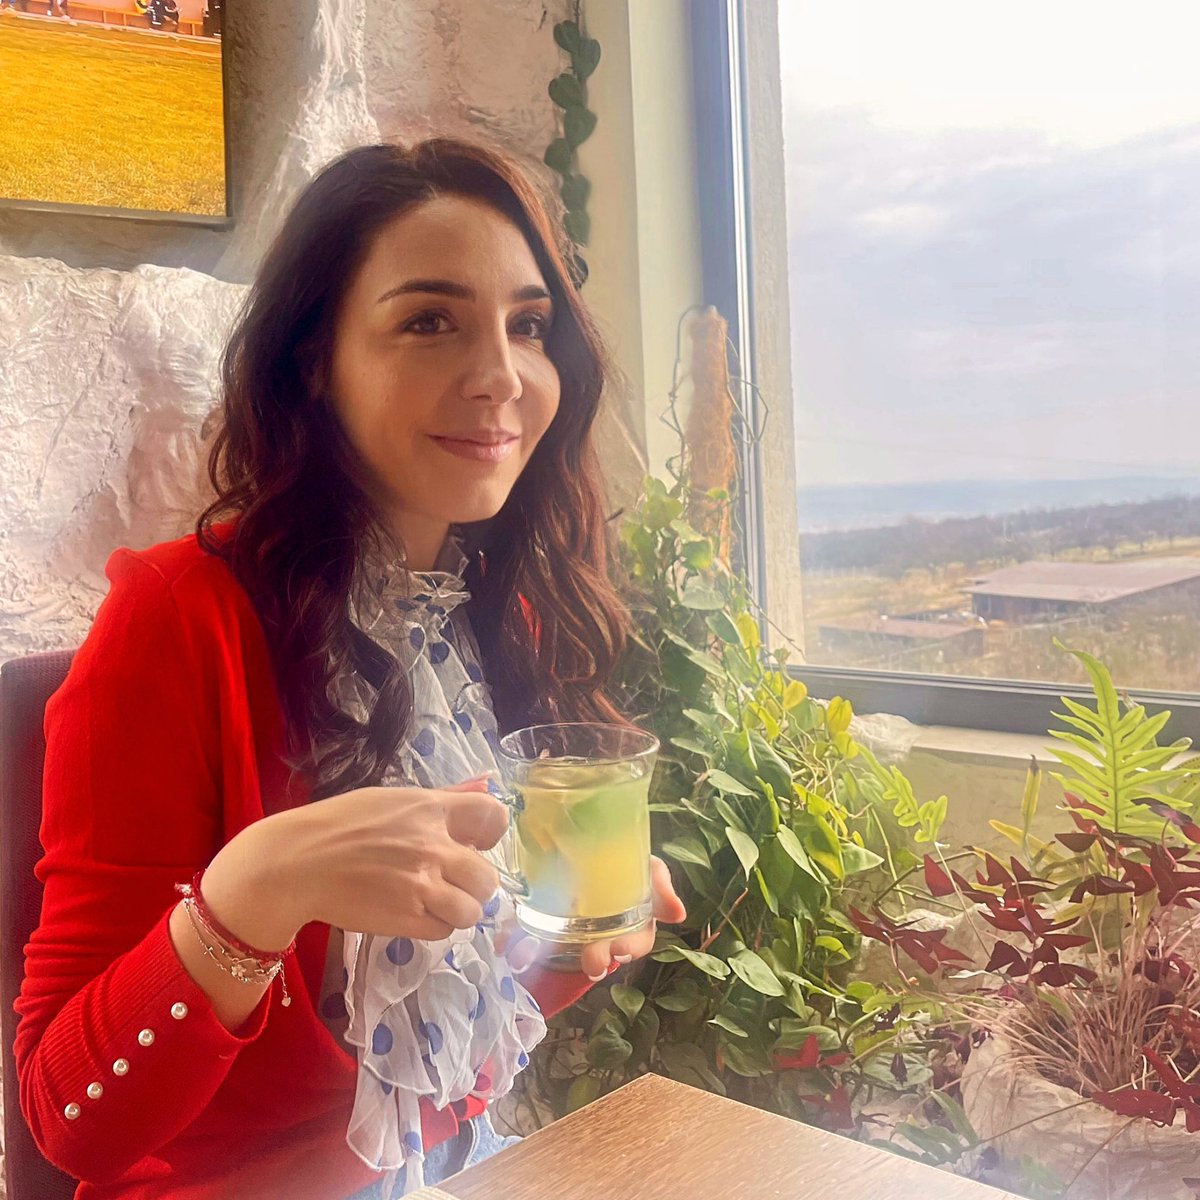 Sometimes all you need is a cup of tea & a few moments of peace…🤍 Blessed & peaceful Sunday! 🙏🤍 #moments #memories #traveler #visitromania #visitcluj